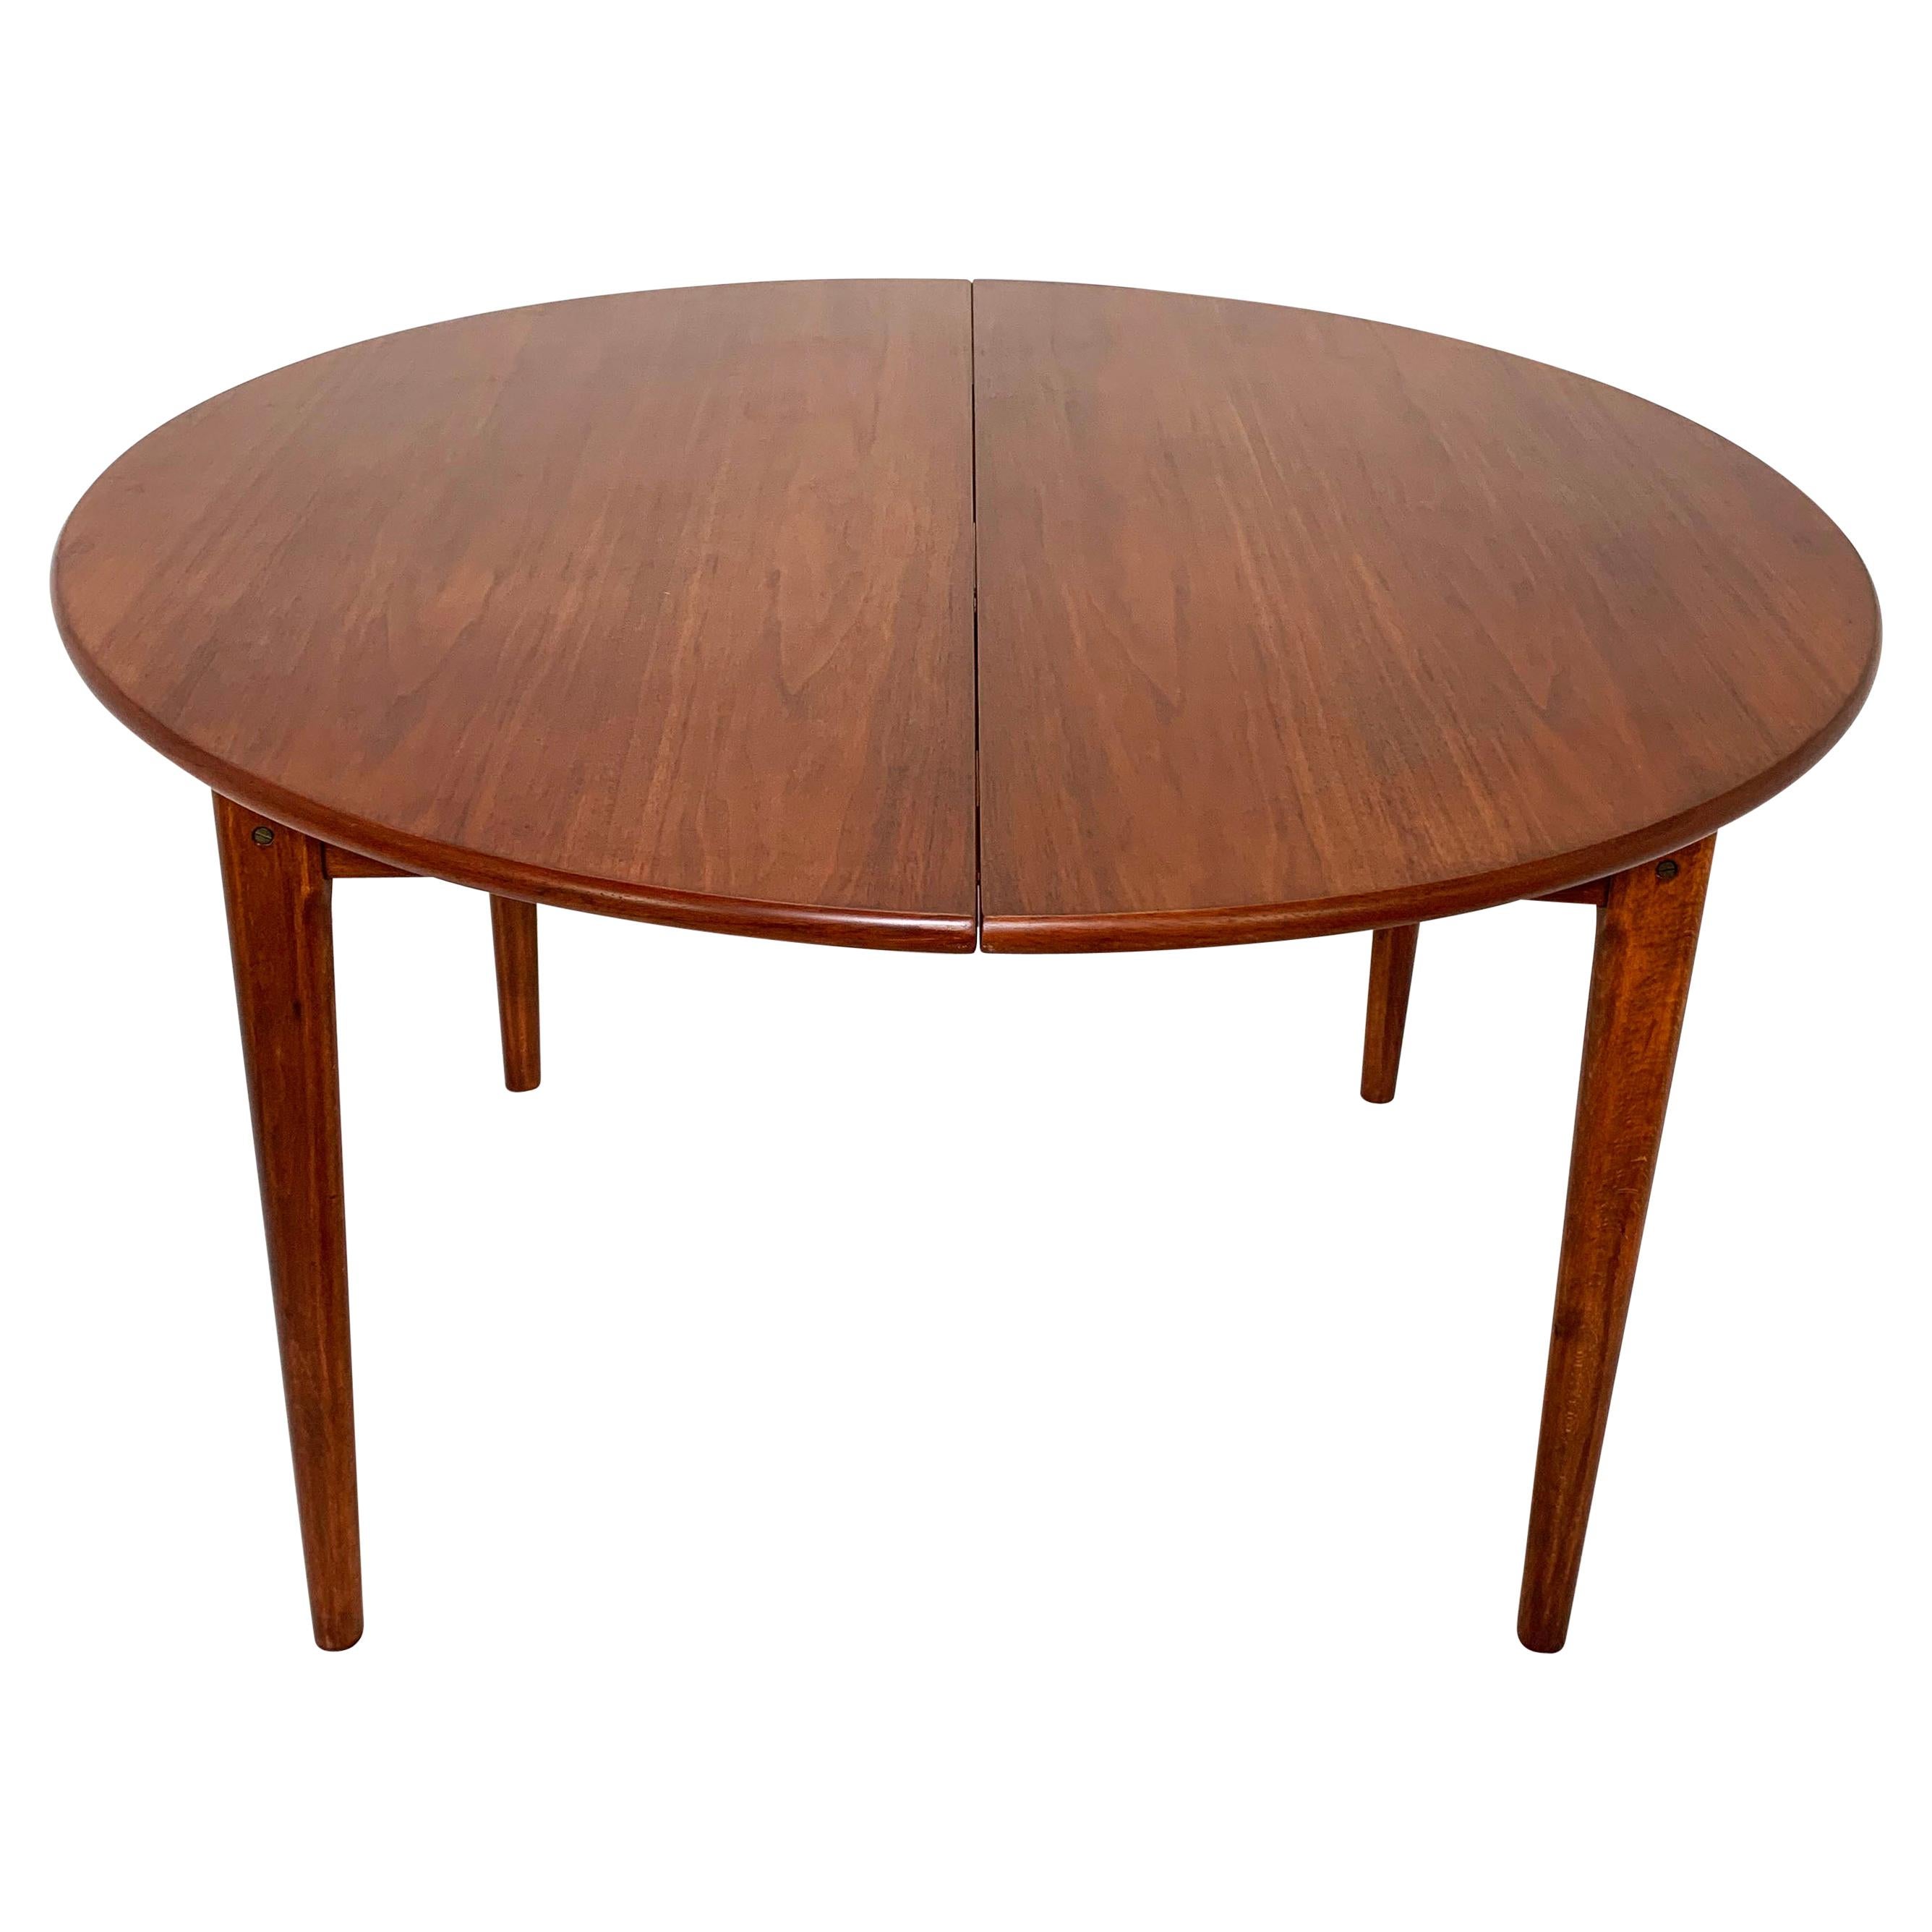 Round Danish Teak Dining Table with Two Leaves, circa 1960s